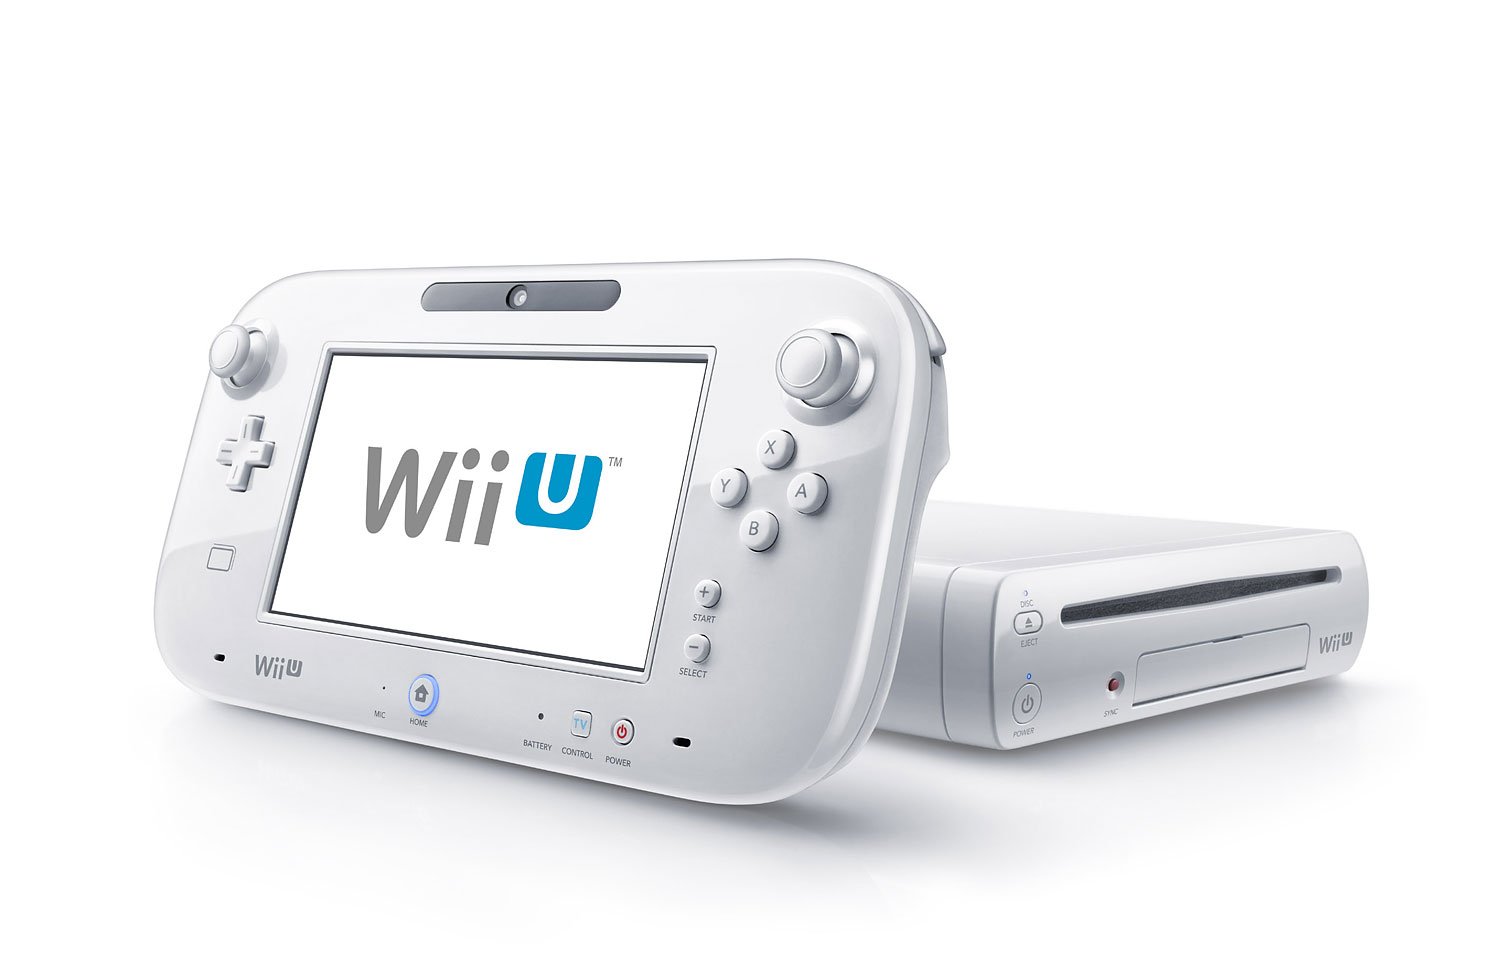 play wii games on wii u without wiimote